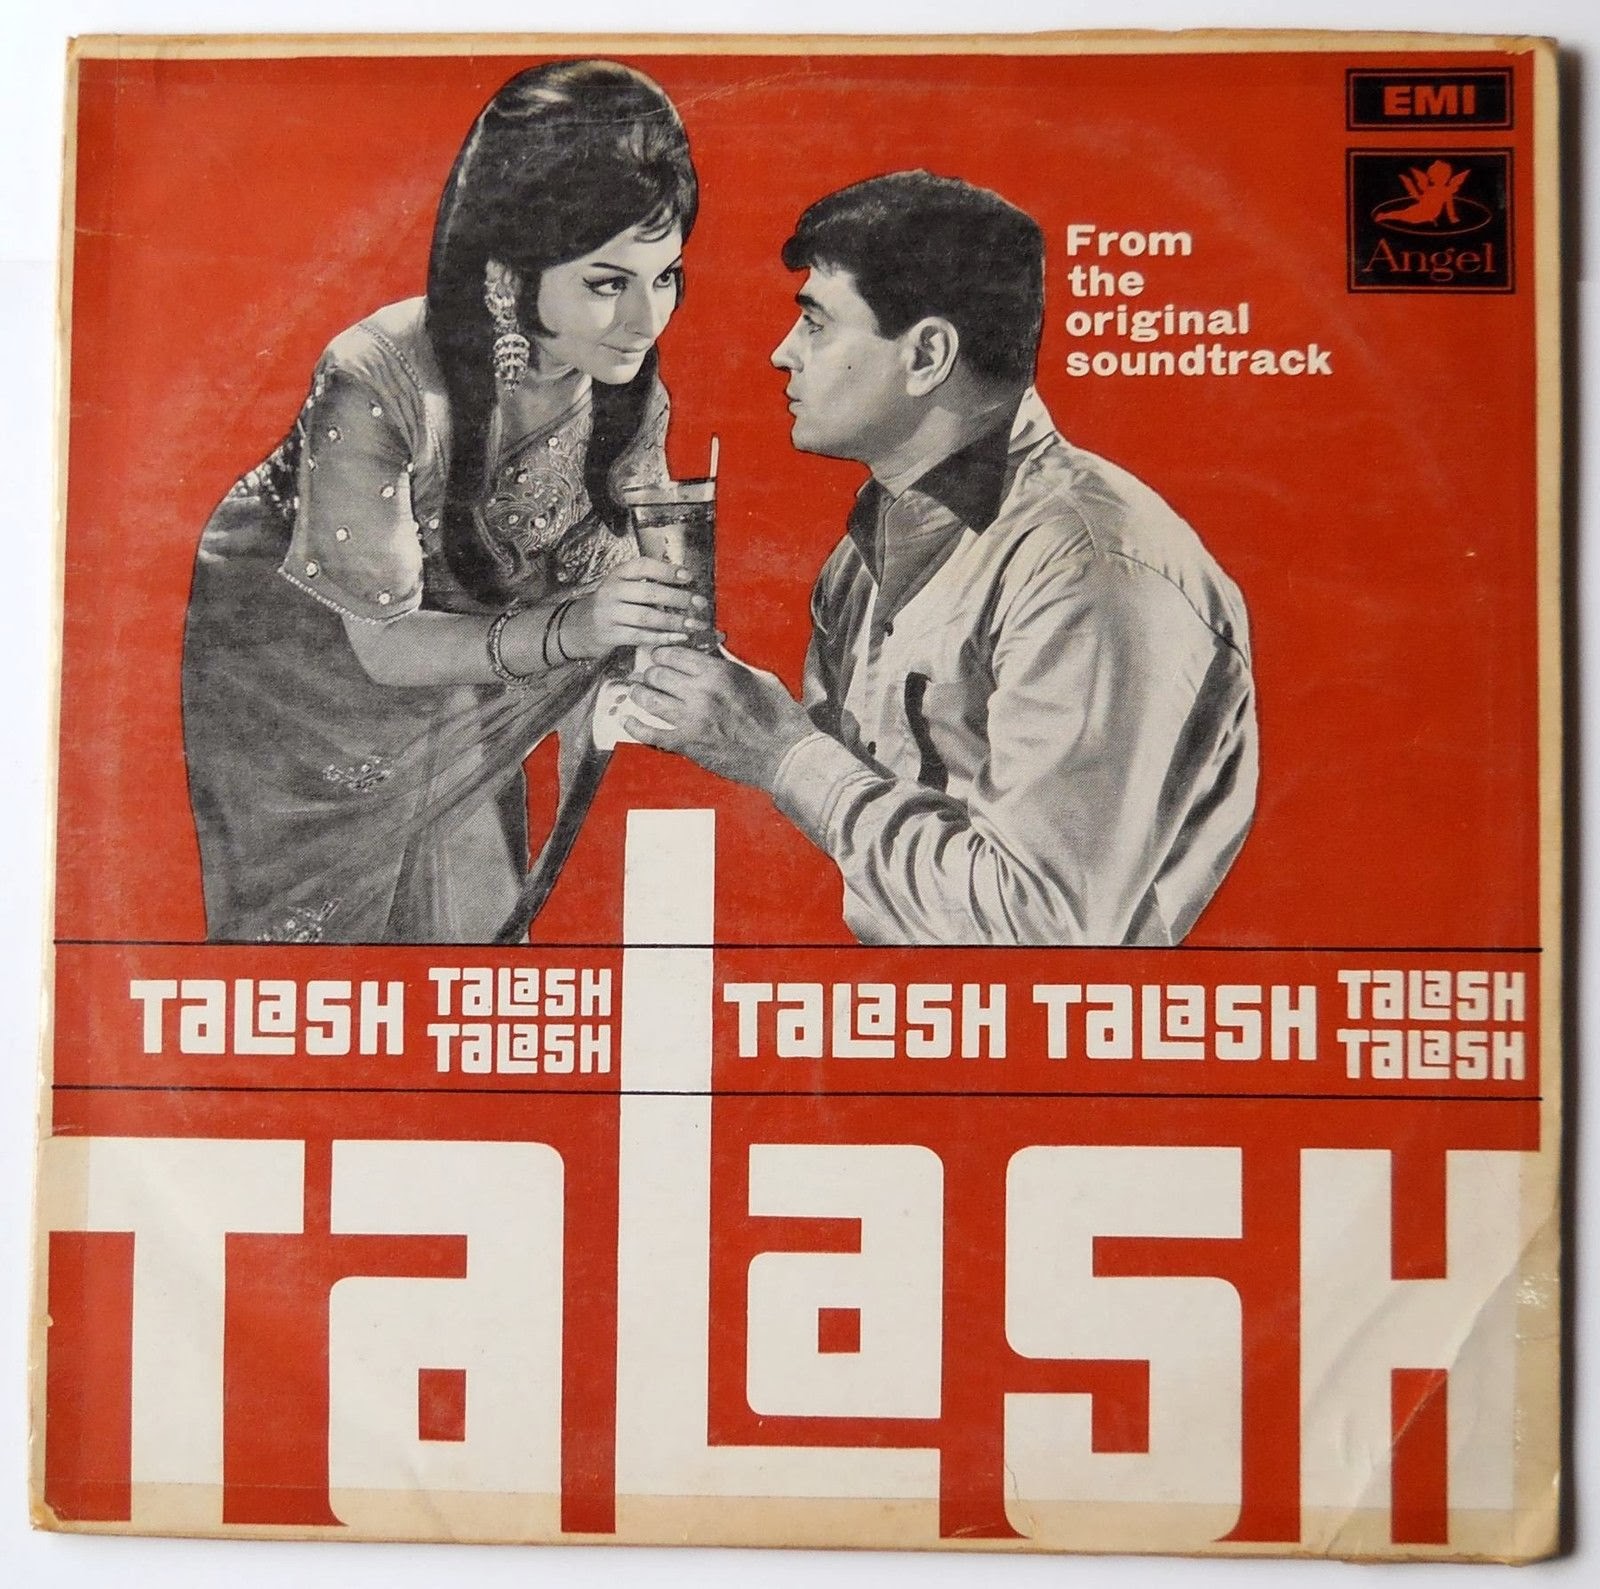 Bollywood Hindi Movie Record Covers - Part 1 - Old Indian 